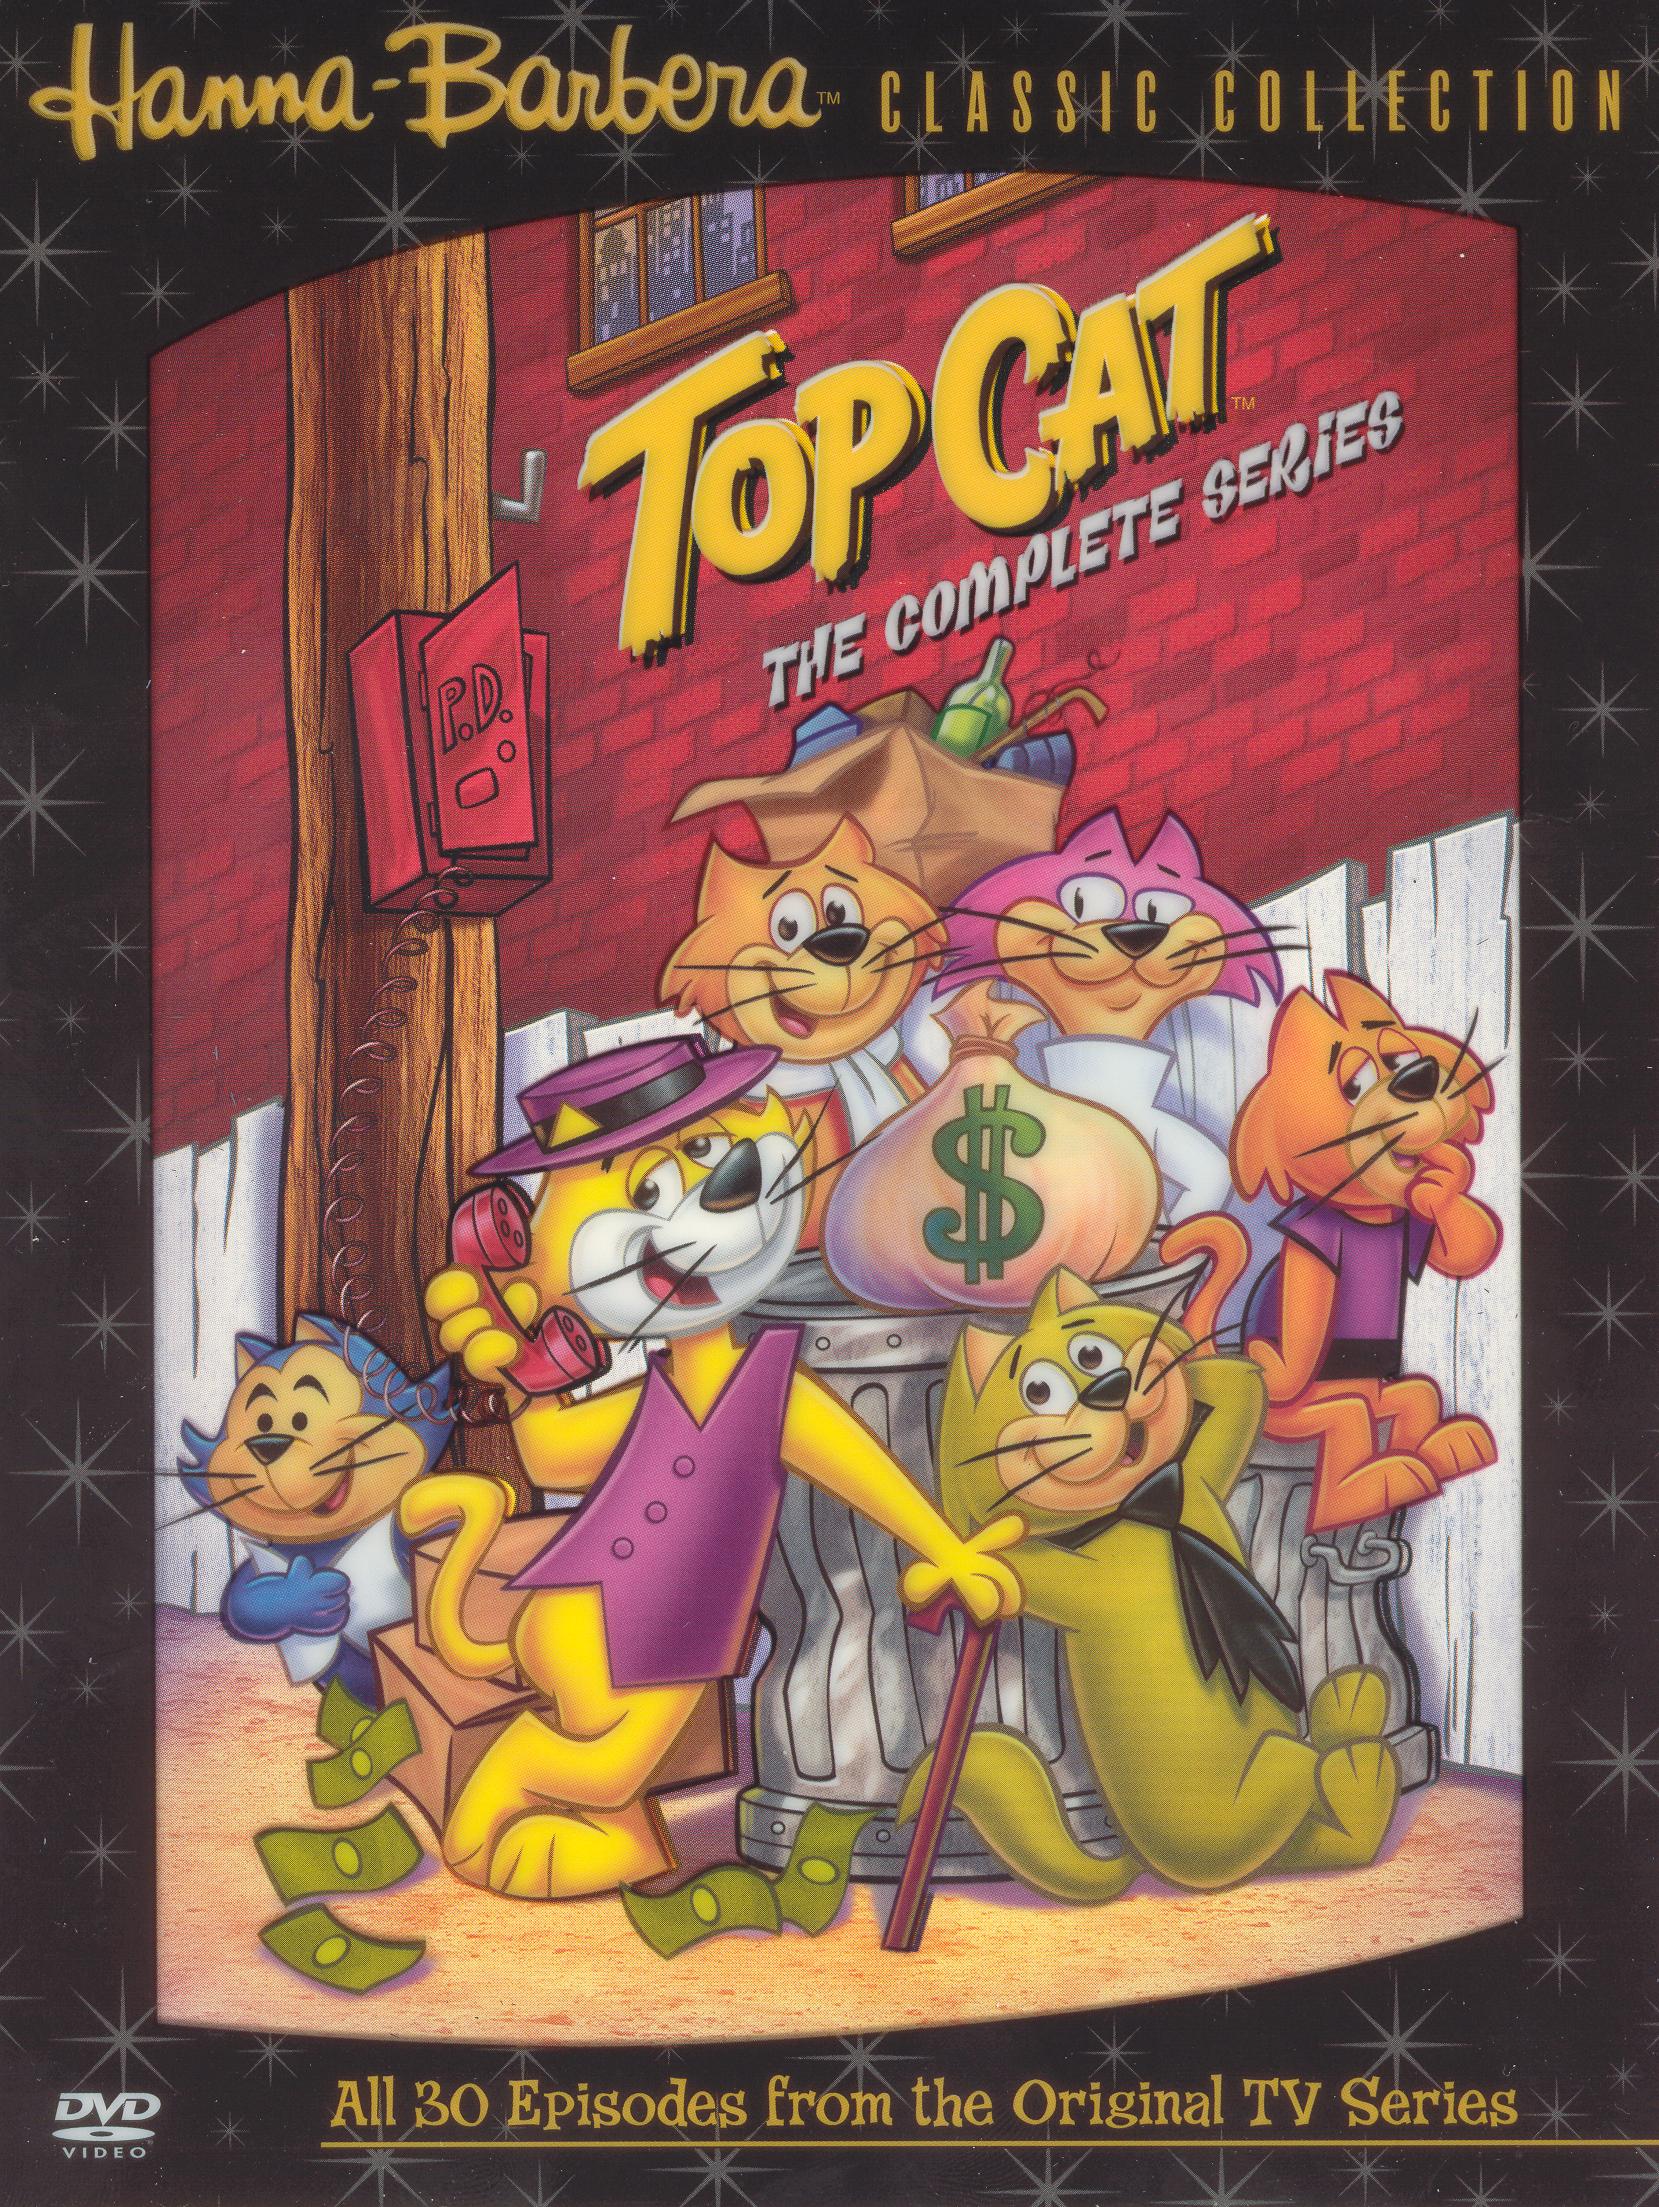 Buy: Hanna-Barbera Classic Collection: Top The Series [4 [DVD]